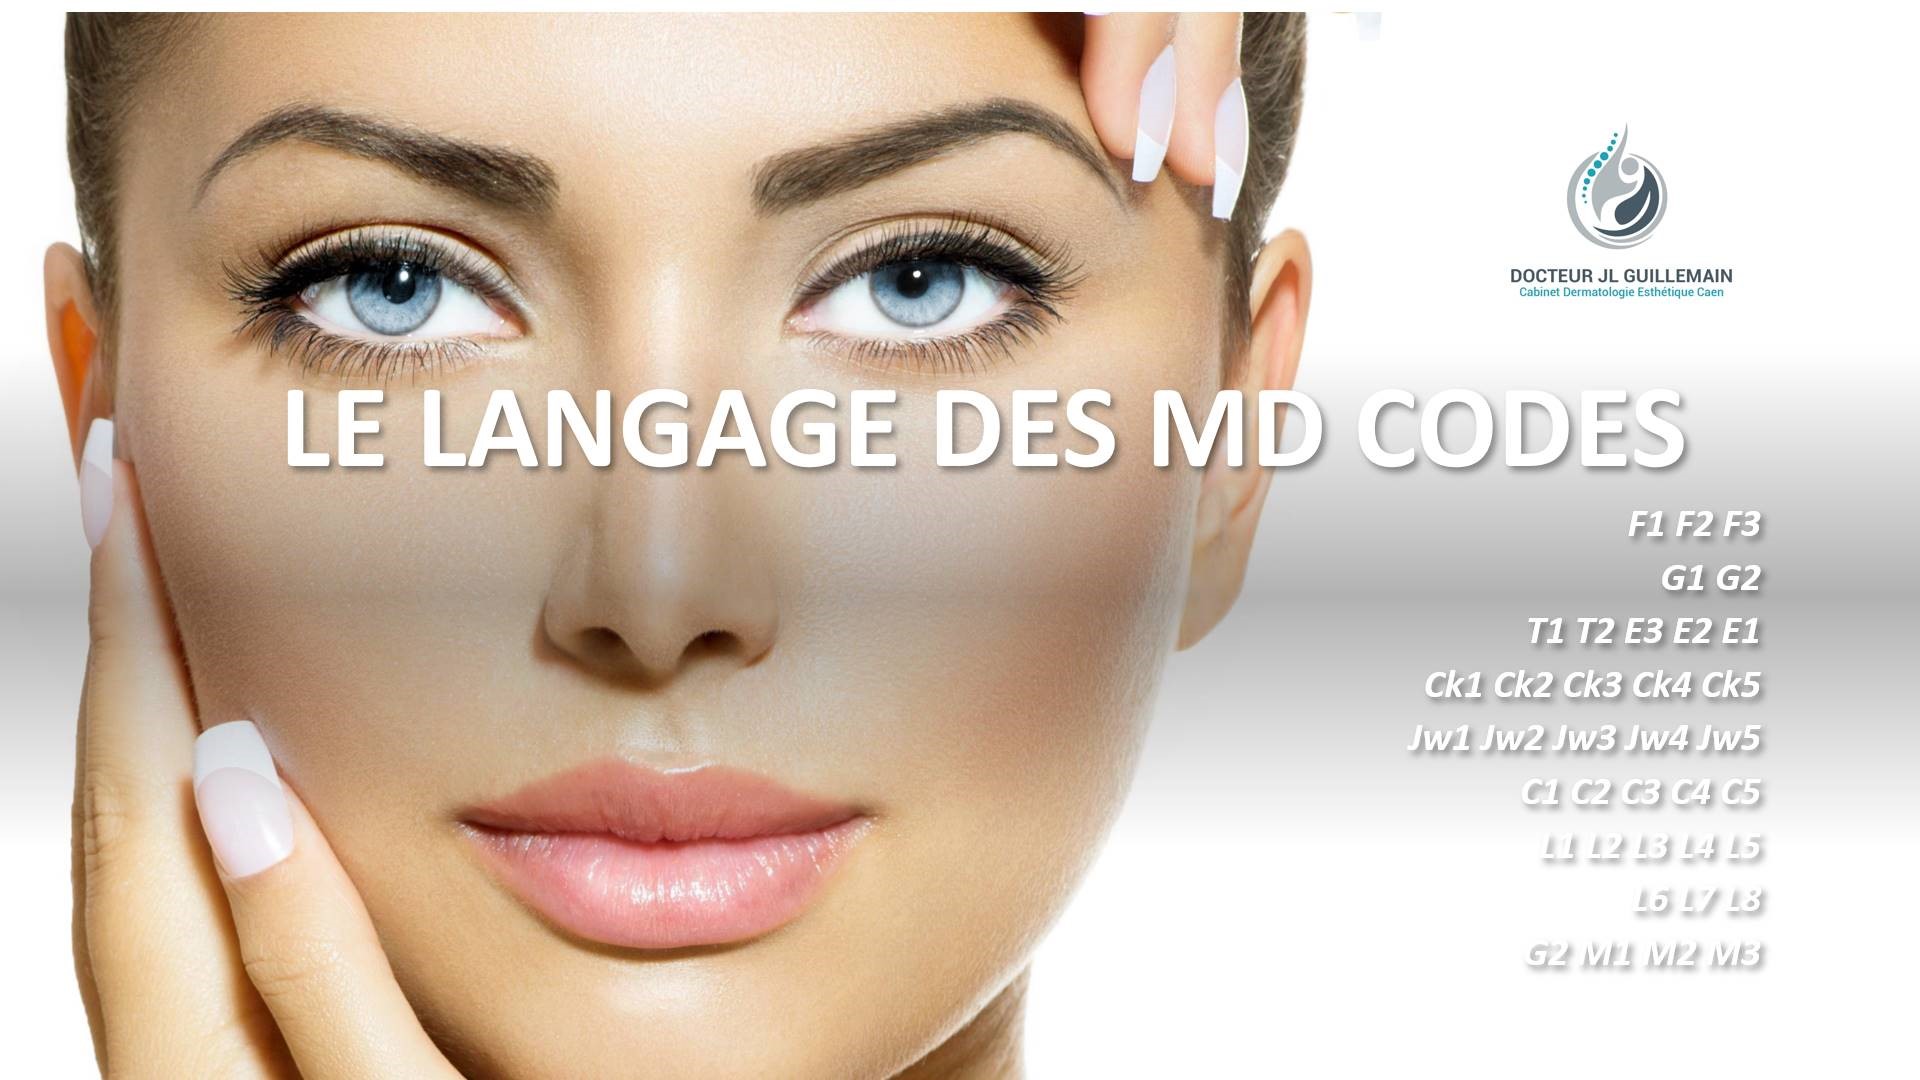 MD CODES | INJECTIONS D’ACIDE HYALURONIQUE